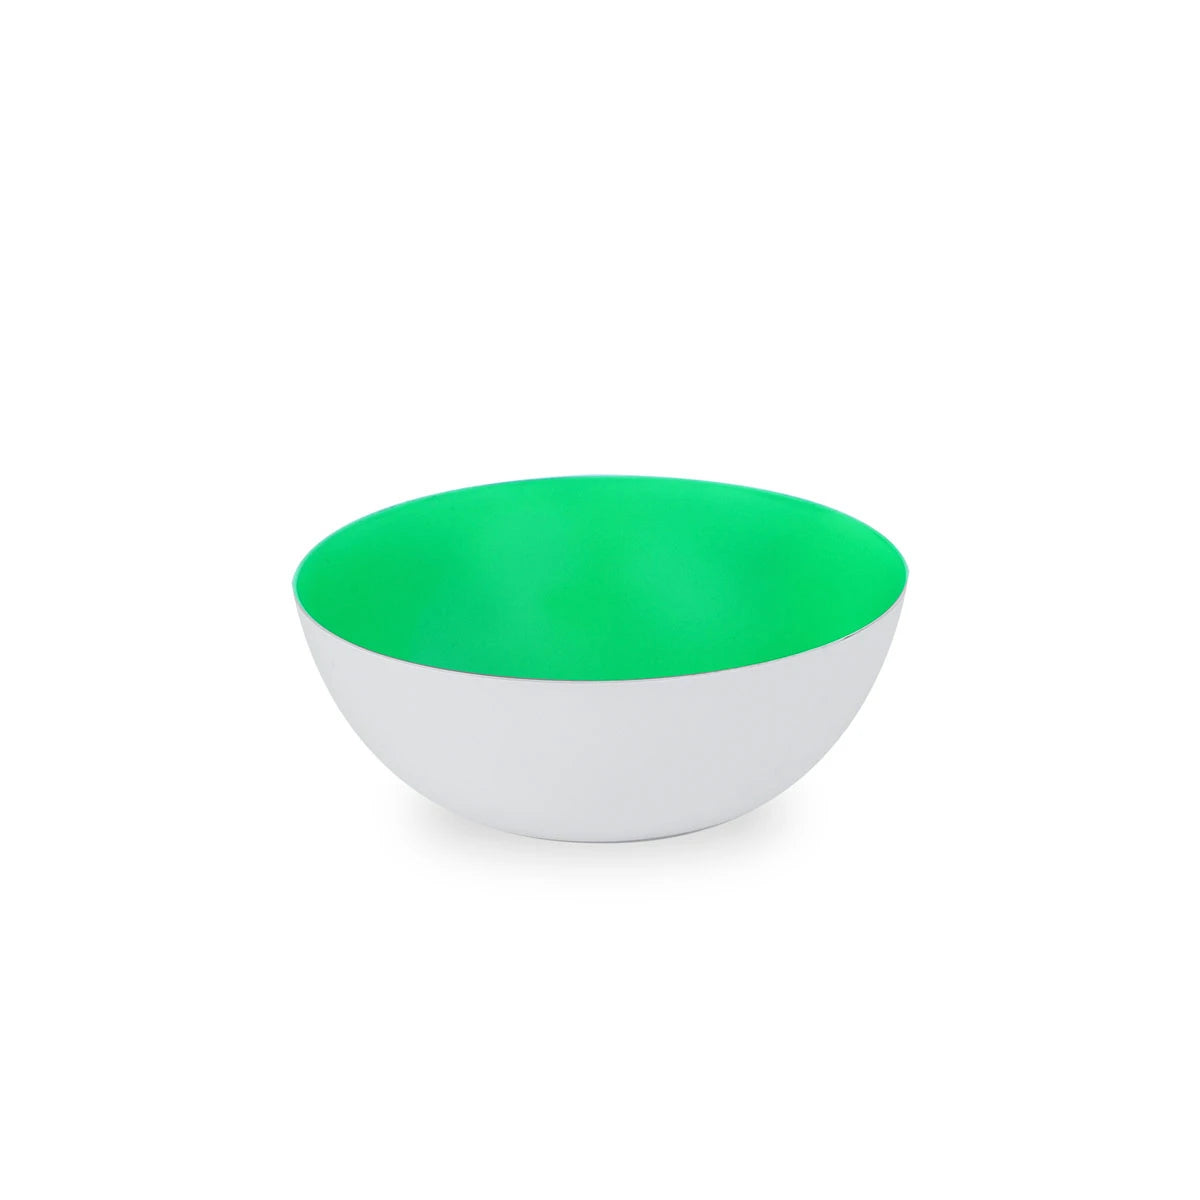 Brushed Matte Green finish Aluminium Bowl for Mixing Doughs & Serving Dishes